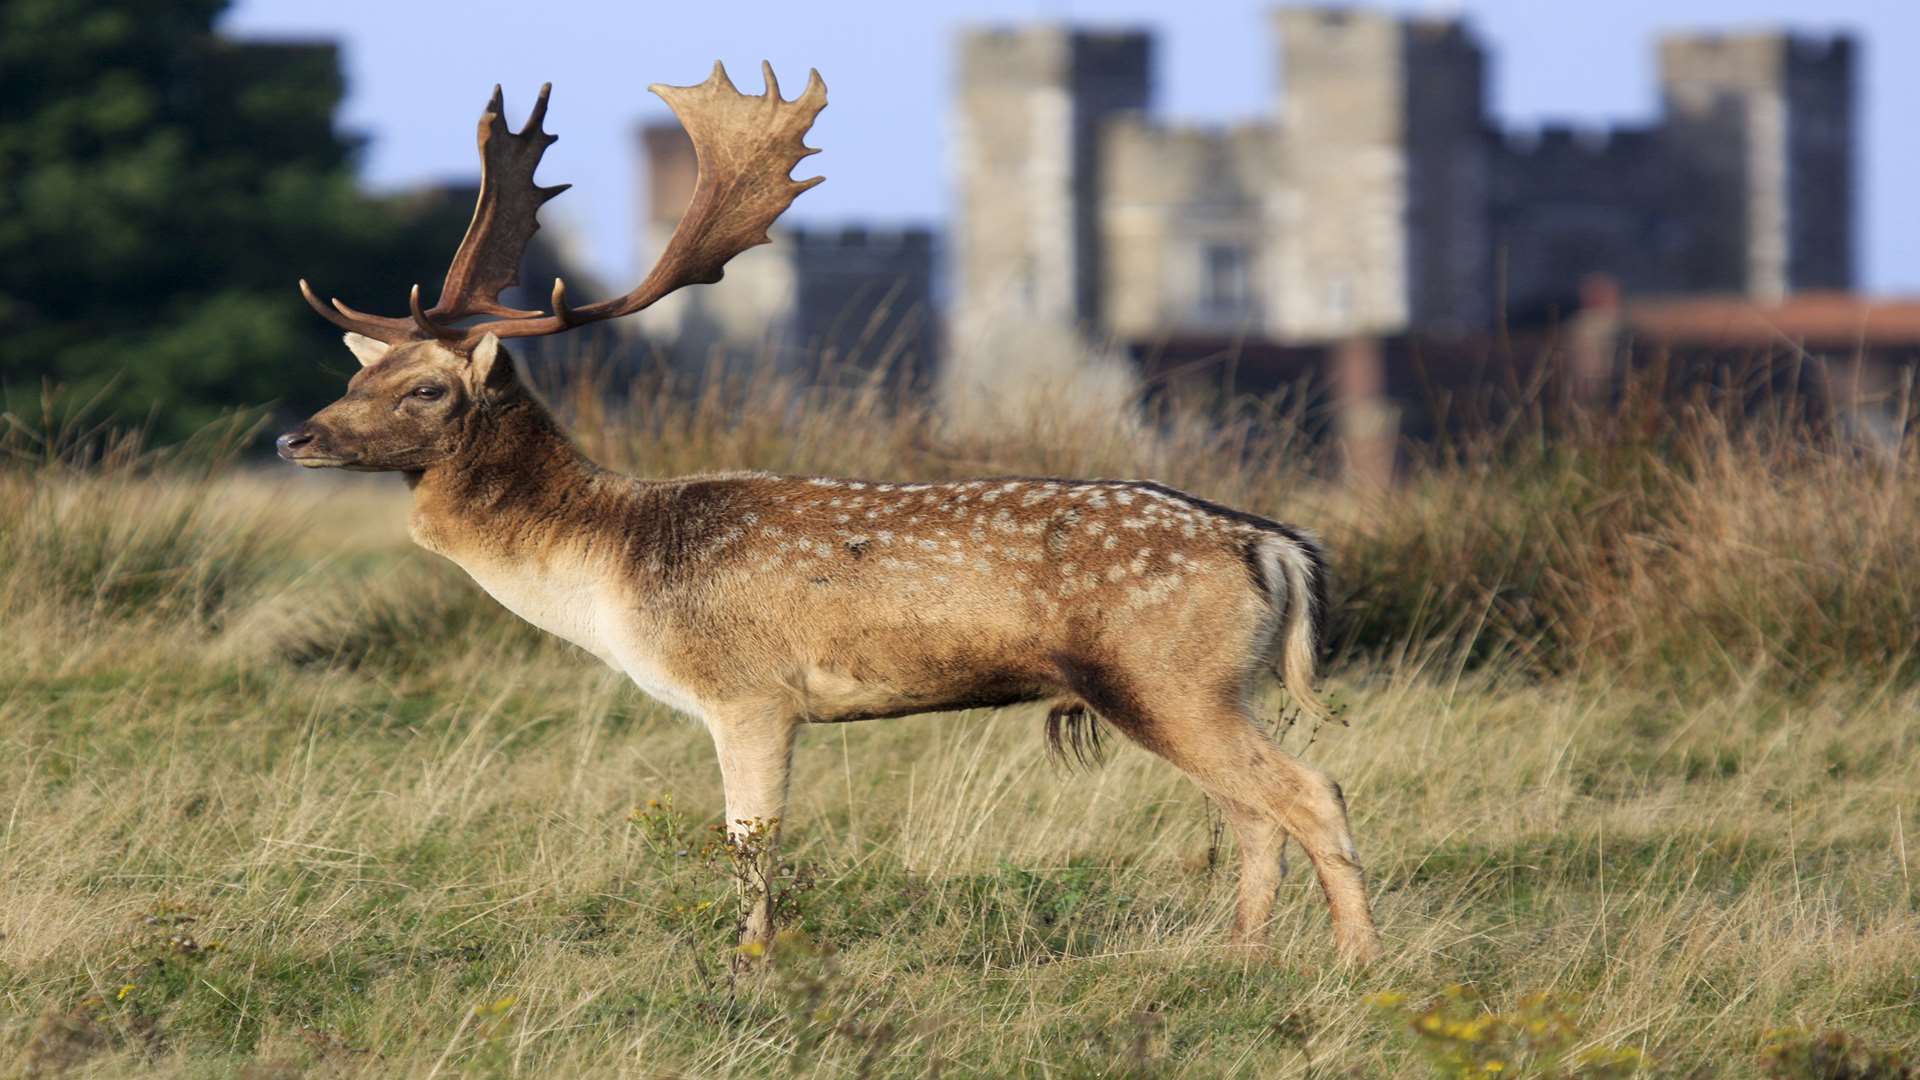 Get to know the locals at Knole Park